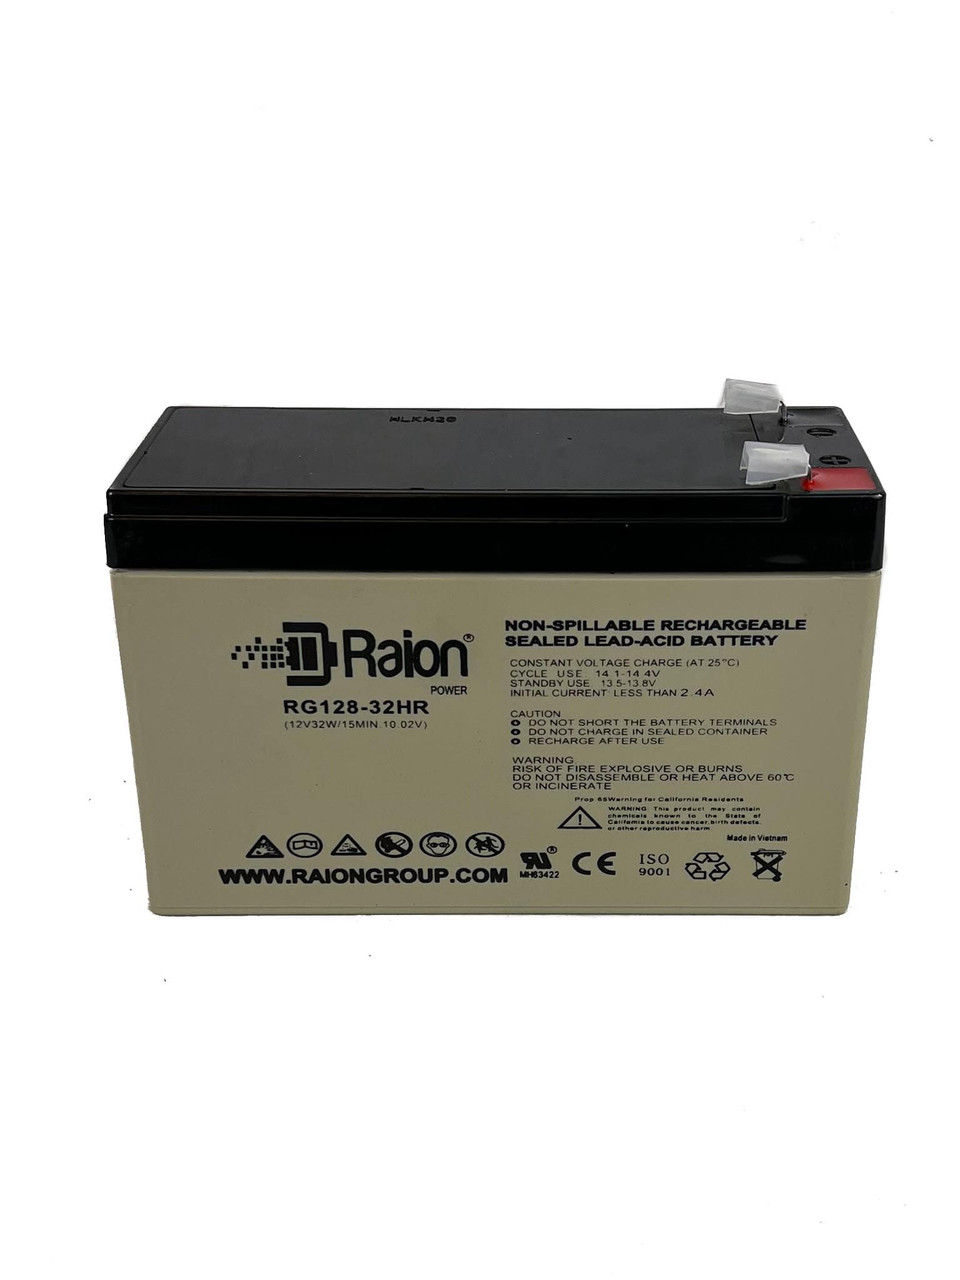 Raion Power RG128-32HR Replacement High Rate Battery Cartridge for Powerware PW3105-700